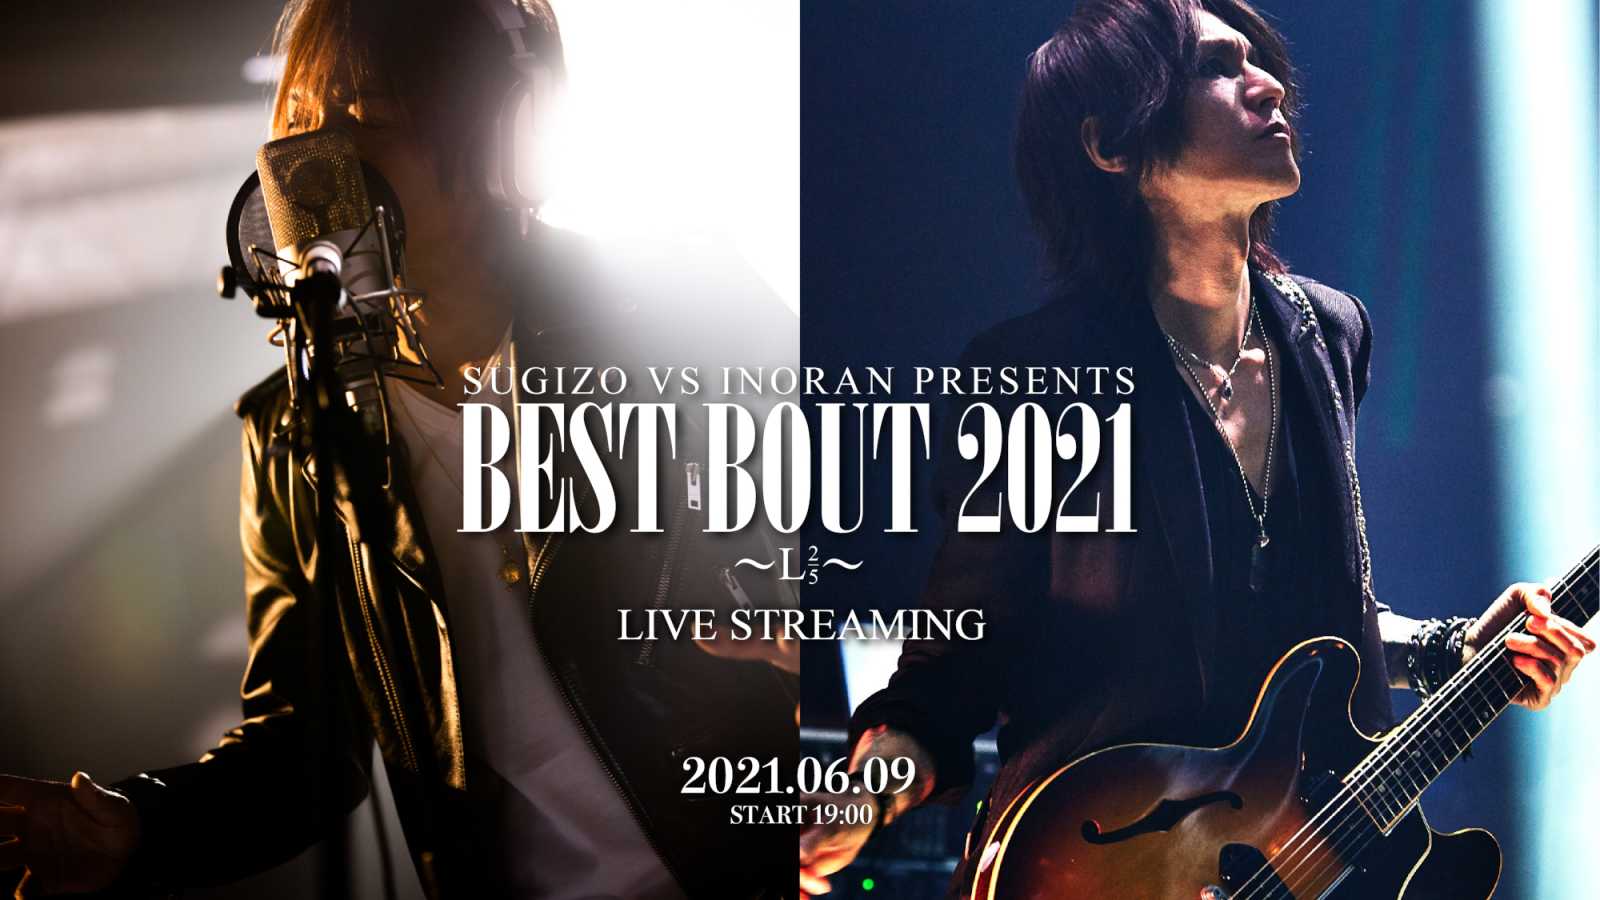 Details on "SUGIZO vs INORAN PRESENTS BEST BOUT" Live Stream © SUGIZO x INORAN. All rights reserved.